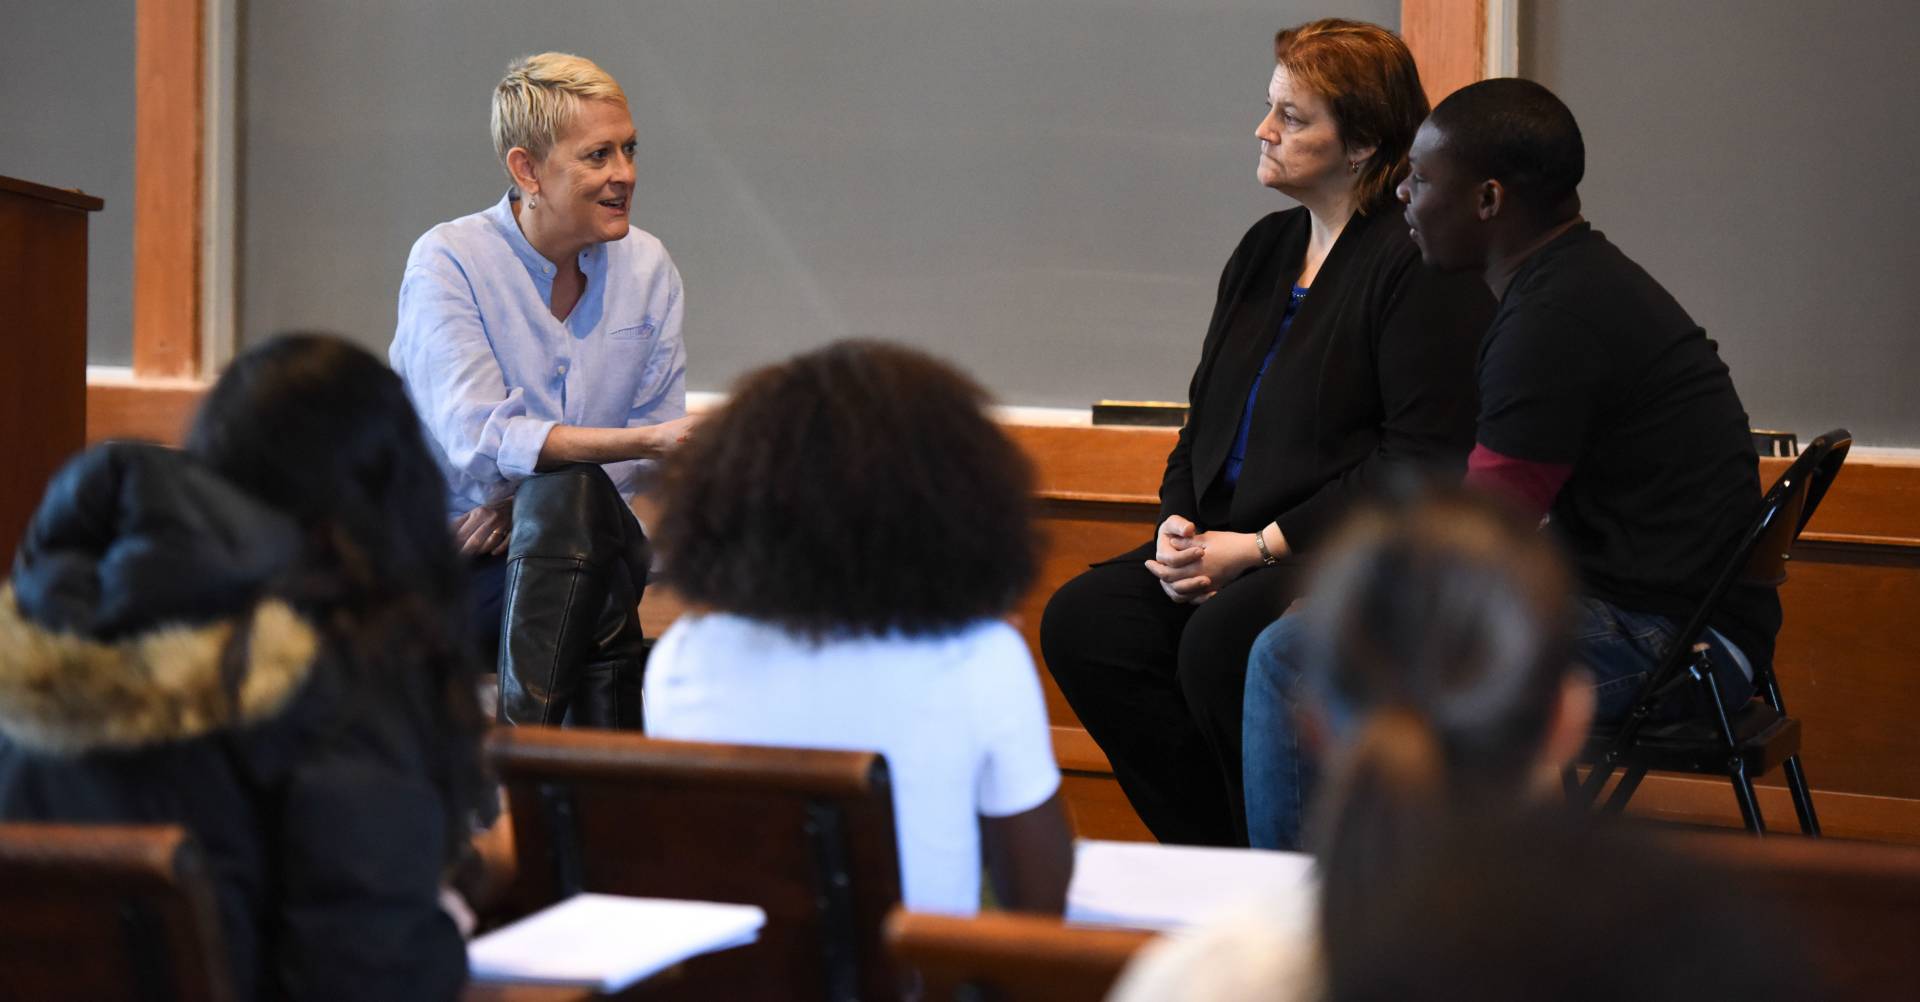 Kathryn Edin speaking with Lorie McDonough and Donnell Clark during class